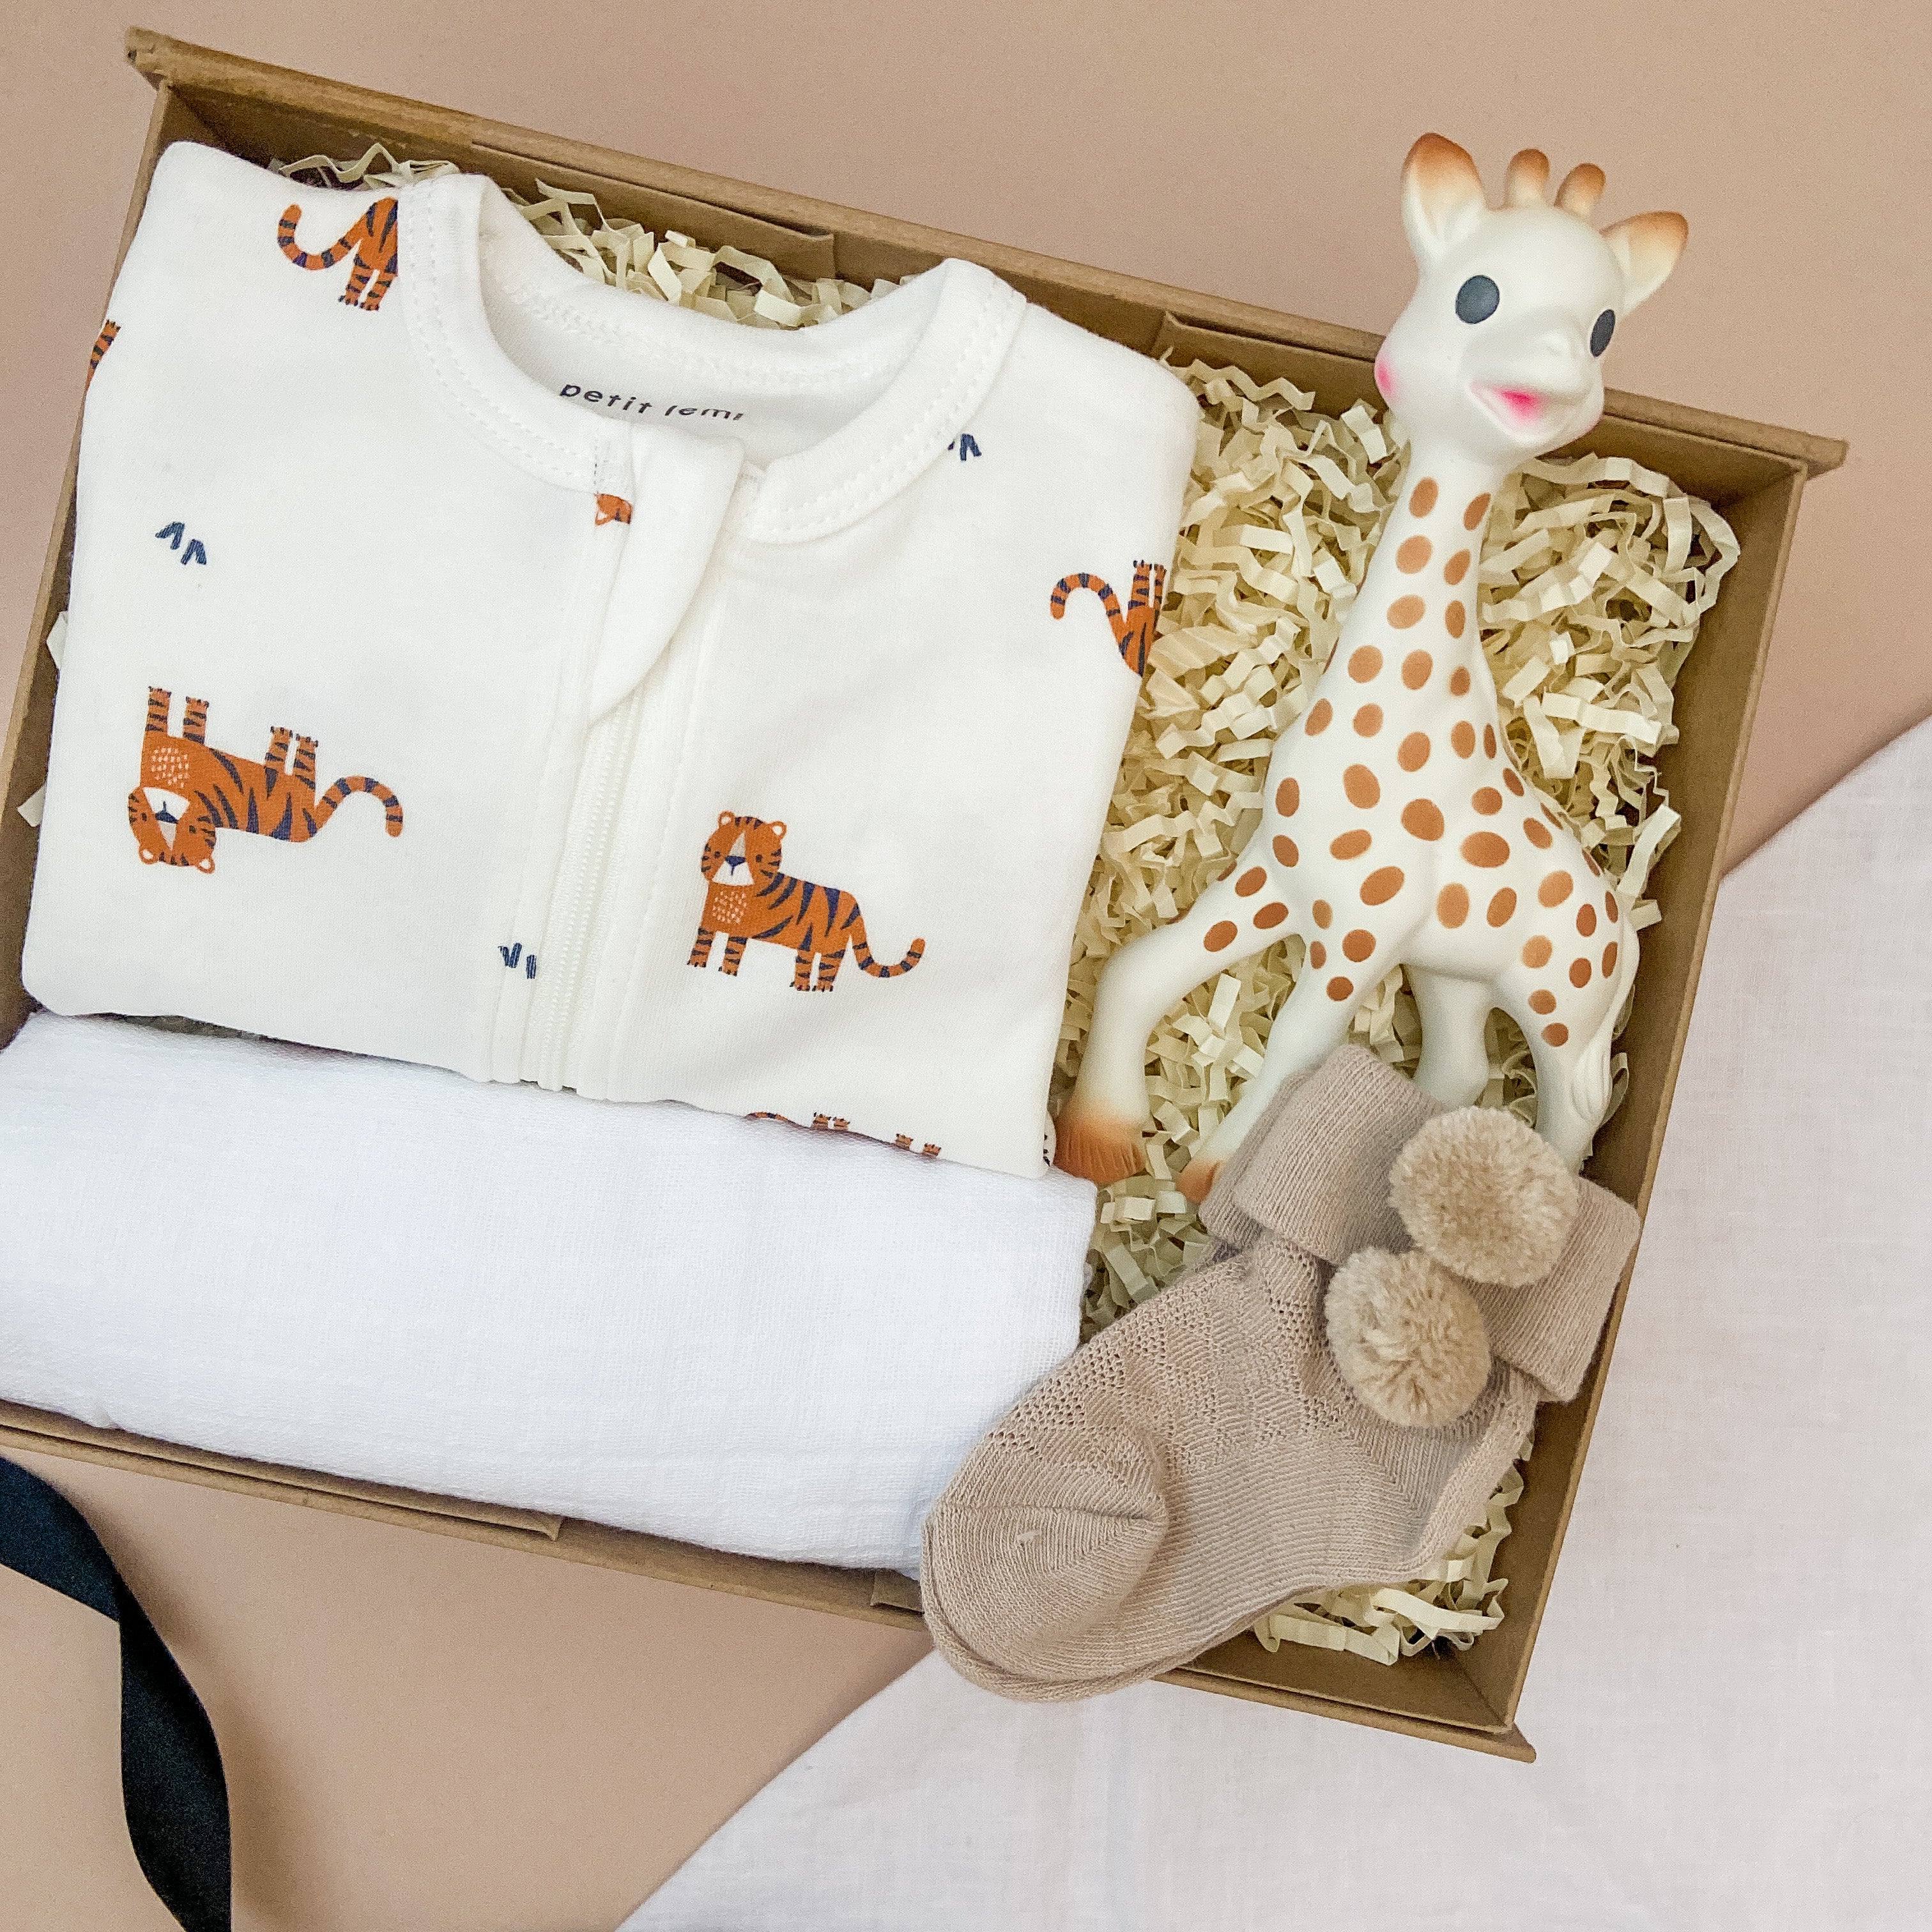 NEW ARRIVAL GIFT BOX - TIGER